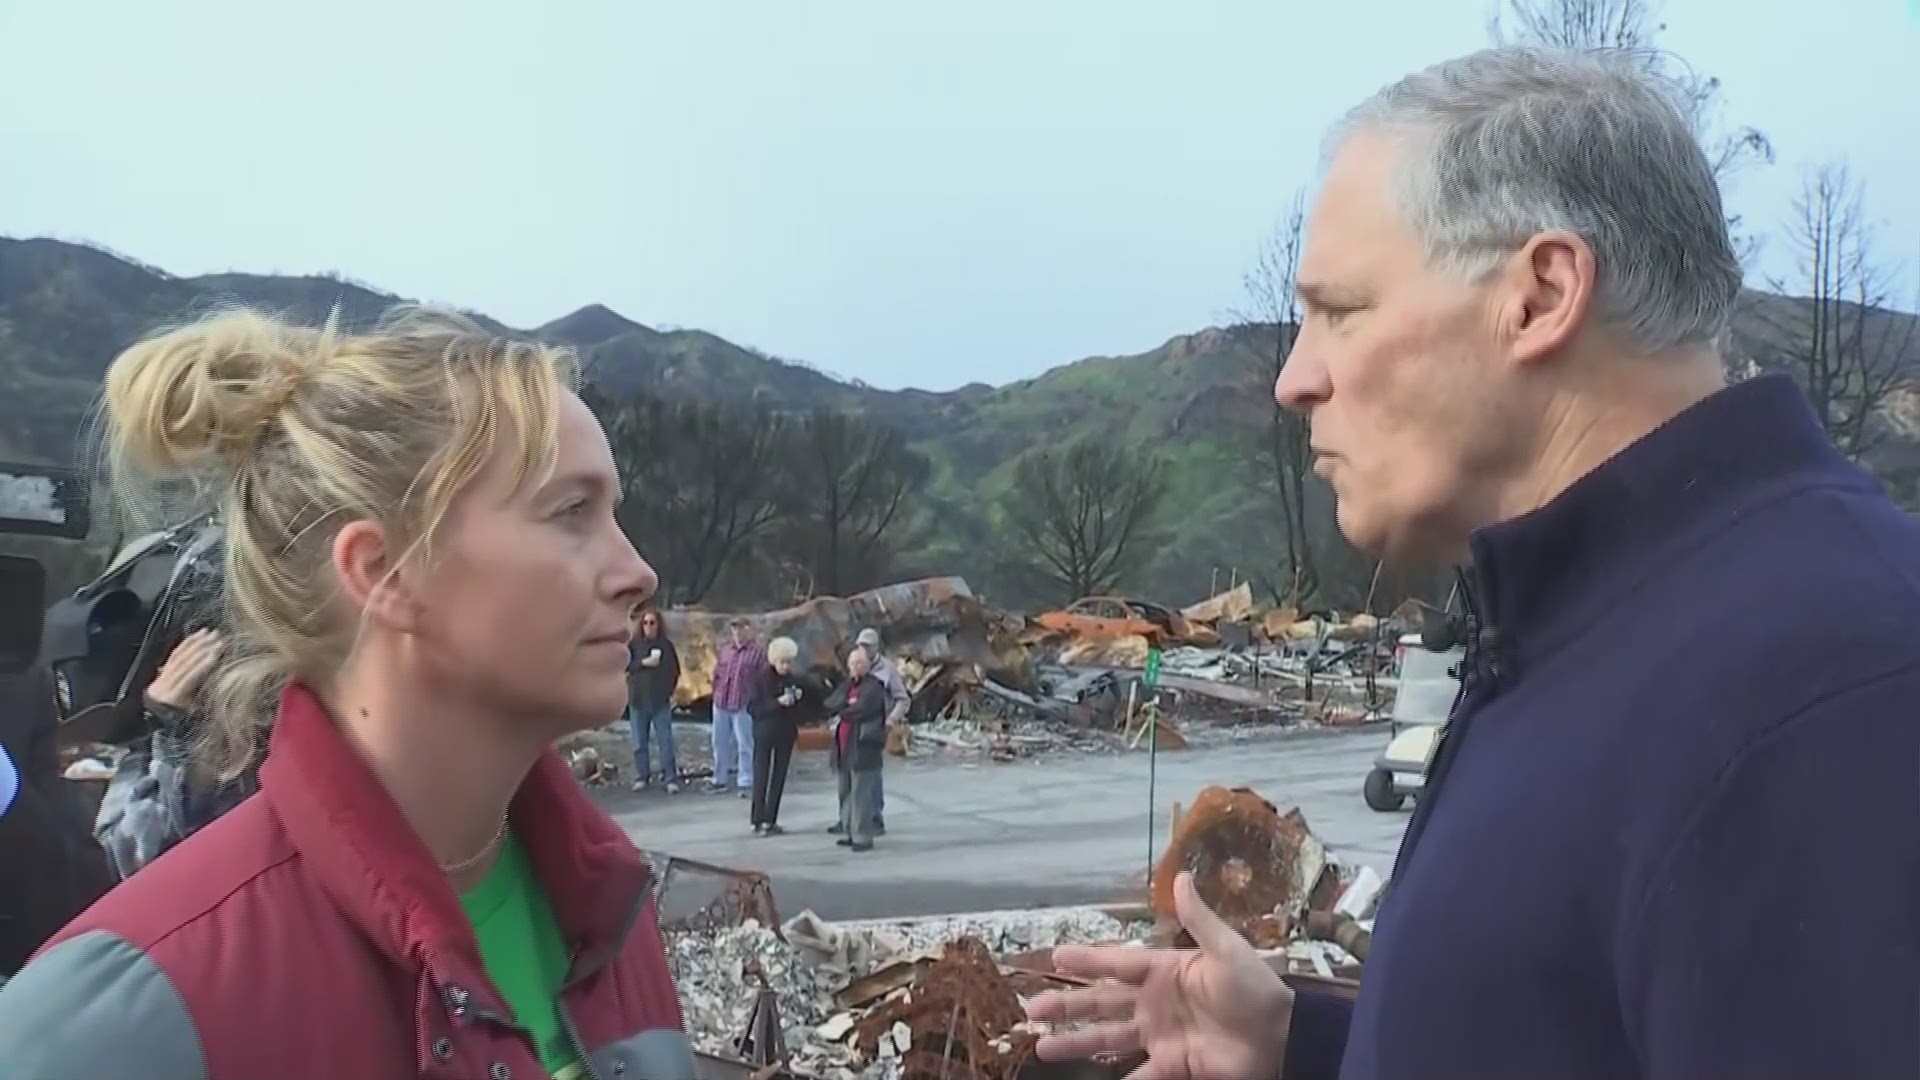 Inslee toured the Seminole Springs Mobile home park in Agoura Hills to survey the impact of last year's deadly Woolsey Fire.